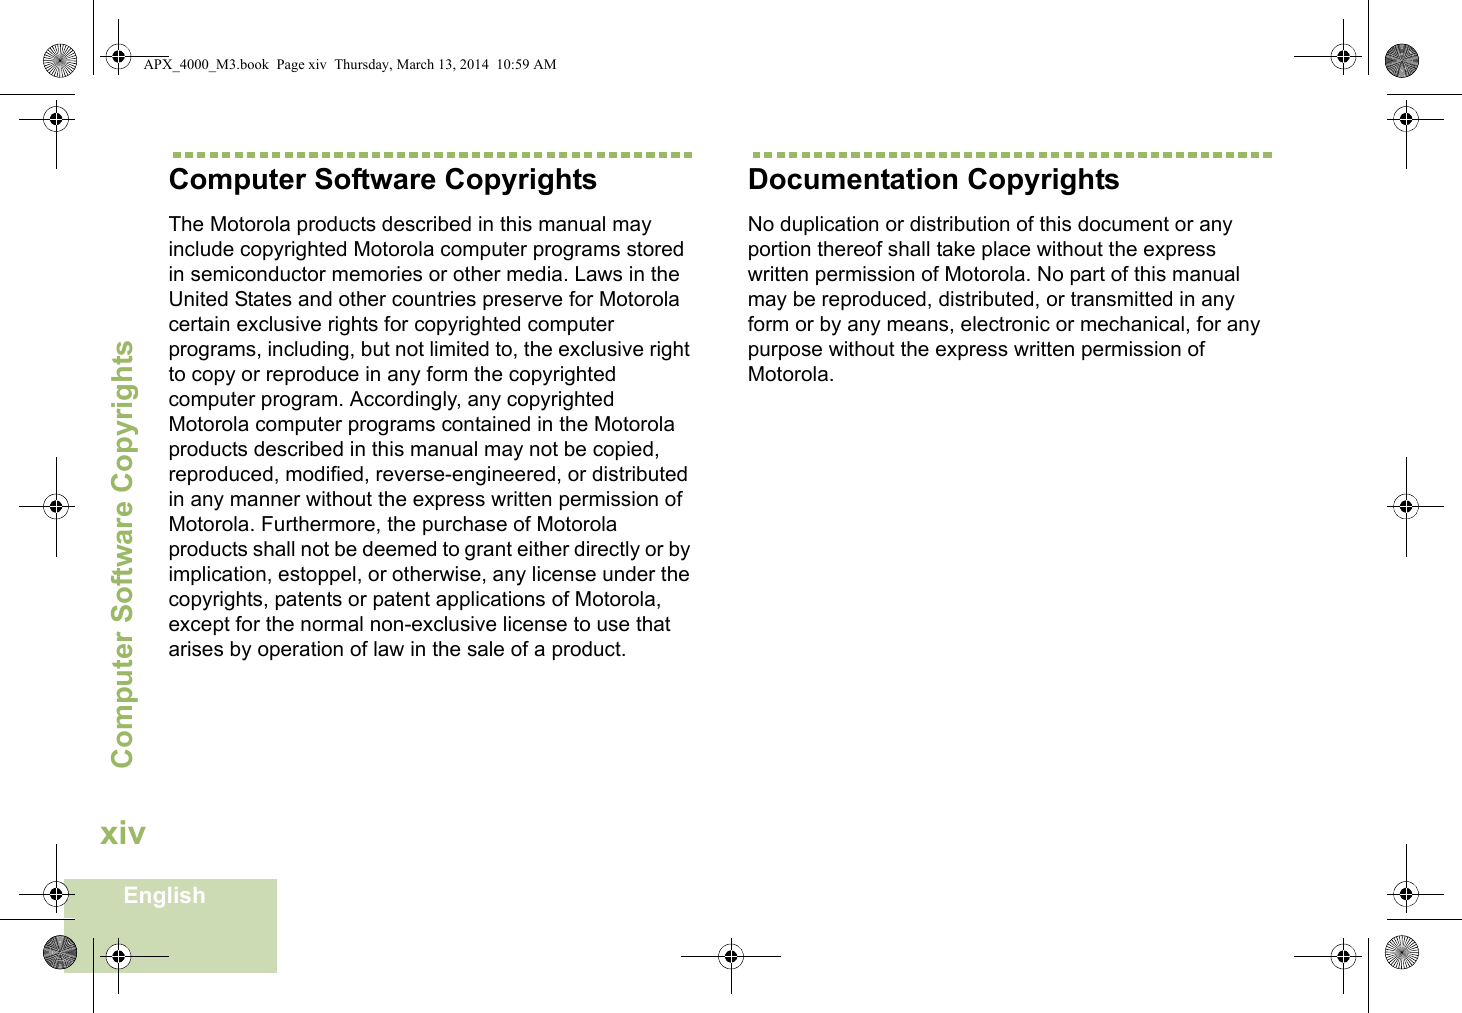 Computer Software CopyrightsEnglishxivComputer Software CopyrightsThe Motorola products described in this manual may include copyrighted Motorola computer programs stored in semiconductor memories or other media. Laws in the United States and other countries preserve for Motorola certain exclusive rights for copyrighted computer programs, including, but not limited to, the exclusive right to copy or reproduce in any form the copyrighted computer program. Accordingly, any copyrighted Motorola computer programs contained in the Motorola products described in this manual may not be copied, reproduced, modified, reverse-engineered, or distributed in any manner without the express written permission of Motorola. Furthermore, the purchase of Motorola products shall not be deemed to grant either directly or by implication, estoppel, or otherwise, any license under the copyrights, patents or patent applications of Motorola, except for the normal non-exclusive license to use that arises by operation of law in the sale of a product.Documentation CopyrightsNo duplication or distribution of this document or any portion thereof shall take place without the express written permission of Motorola. No part of this manual may be reproduced, distributed, or transmitted in any form or by any means, electronic or mechanical, for any purpose without the express written permission of Motorola.APX_4000_M3.book  Page xiv  Thursday, March 13, 2014  10:59 AM